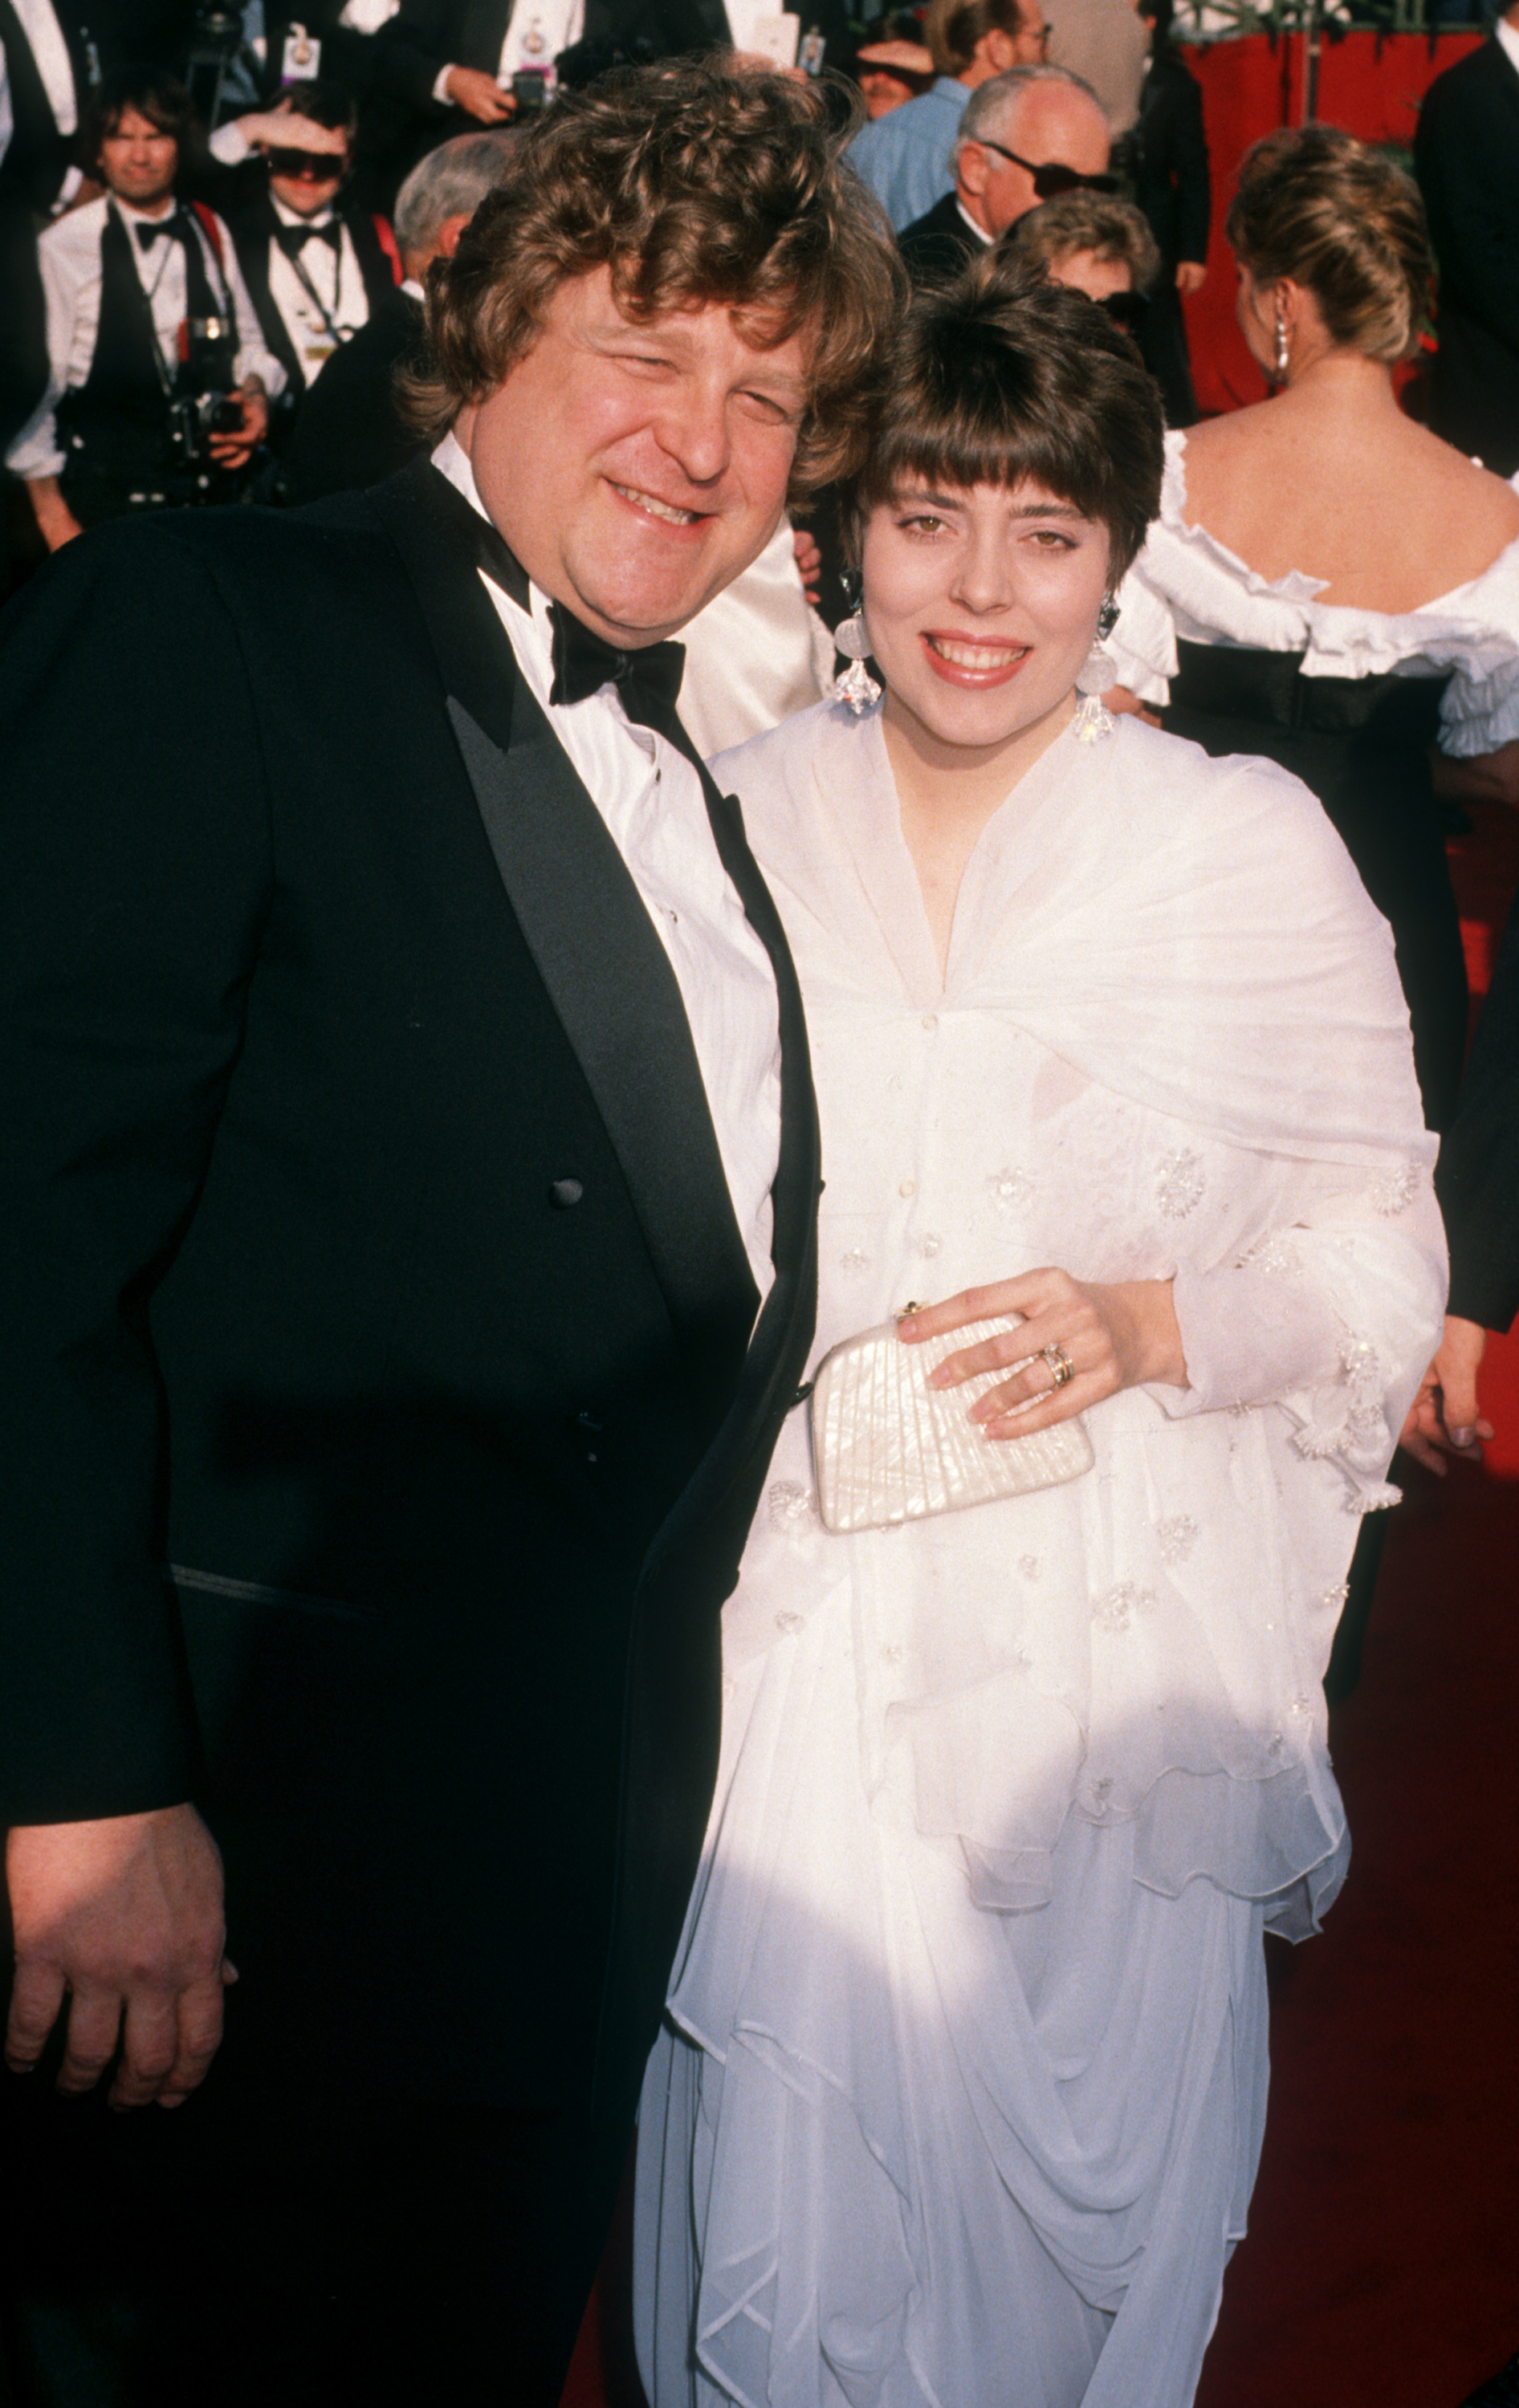 John Goodman and his wife Annabeth Hartzog attend the 62nd Annual Academy Awards on March 26, 1990, at the Dorothy Chandler Pavilion in Los Angeles, California. | Source: Getty Images